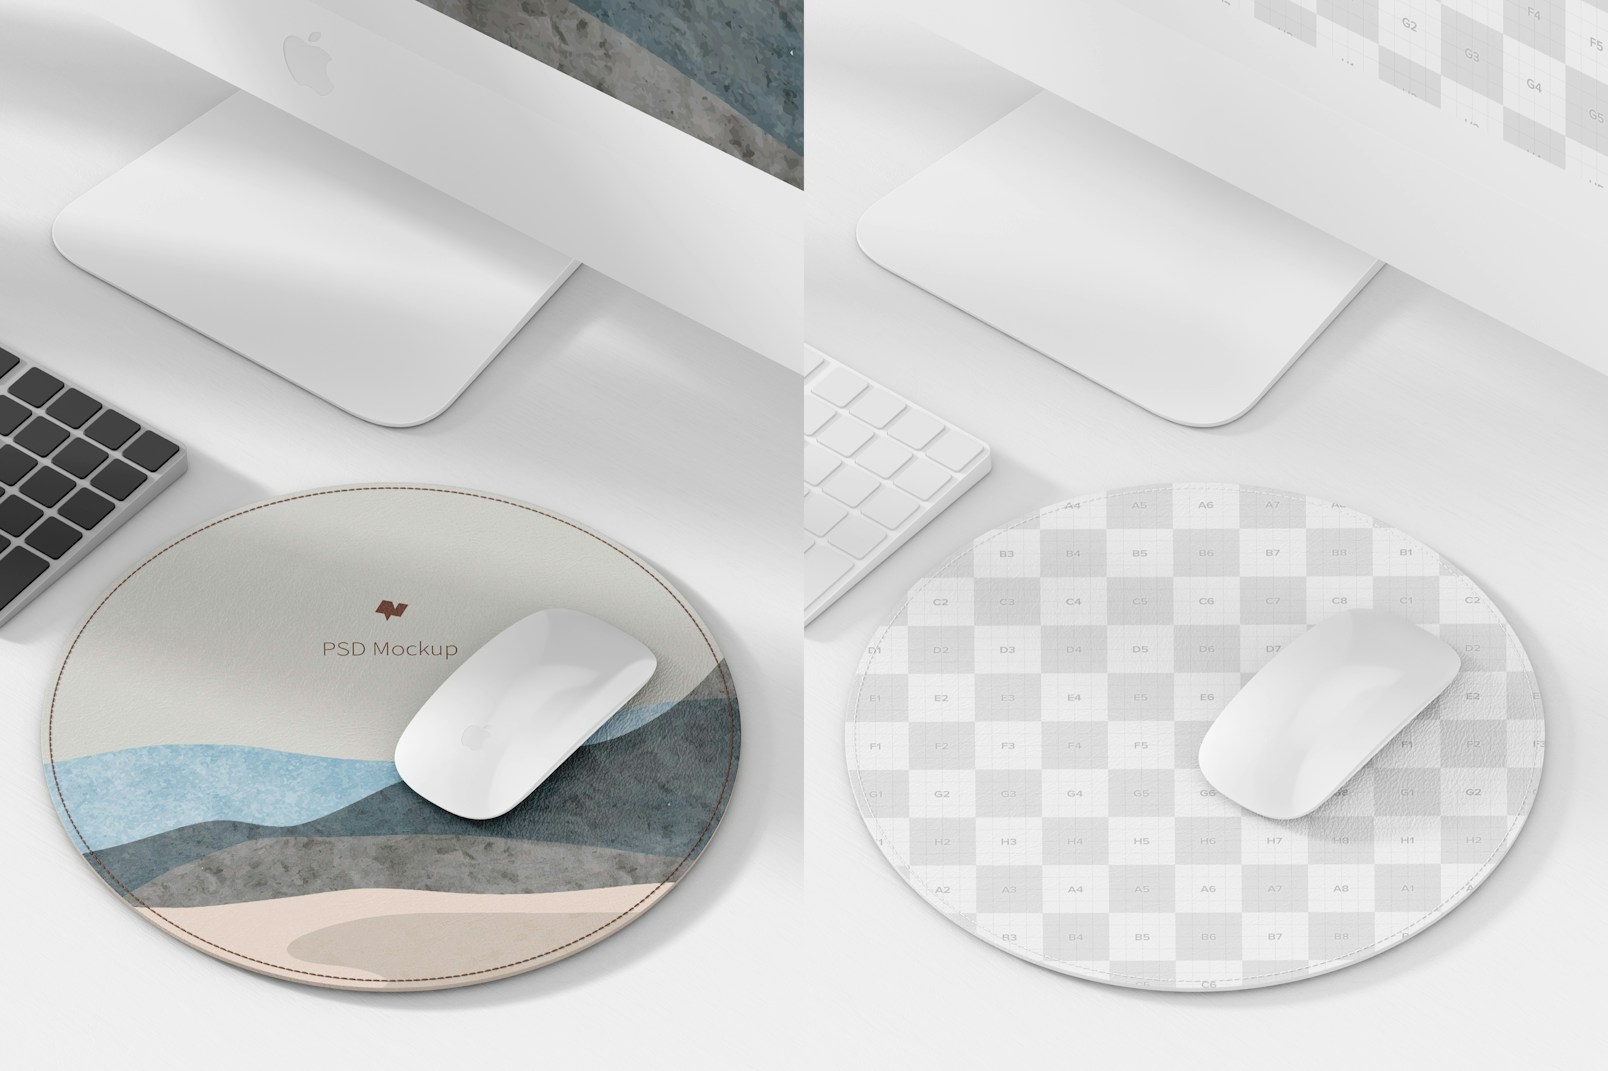 Round Leather Mouse Pad Mockup, with Computer